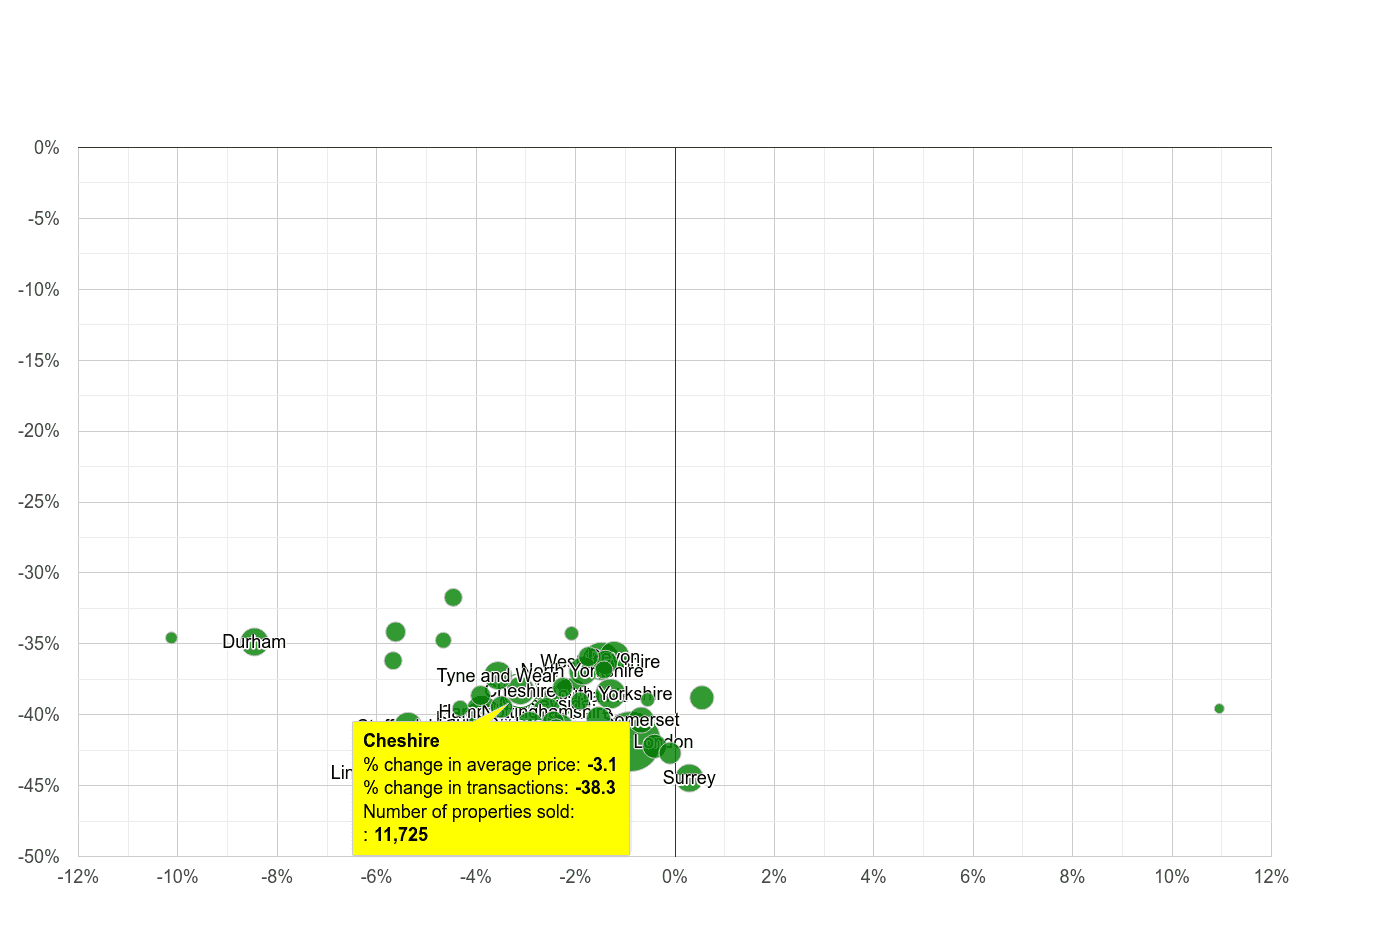 Cheshire property price and sales volume change relative to other counties